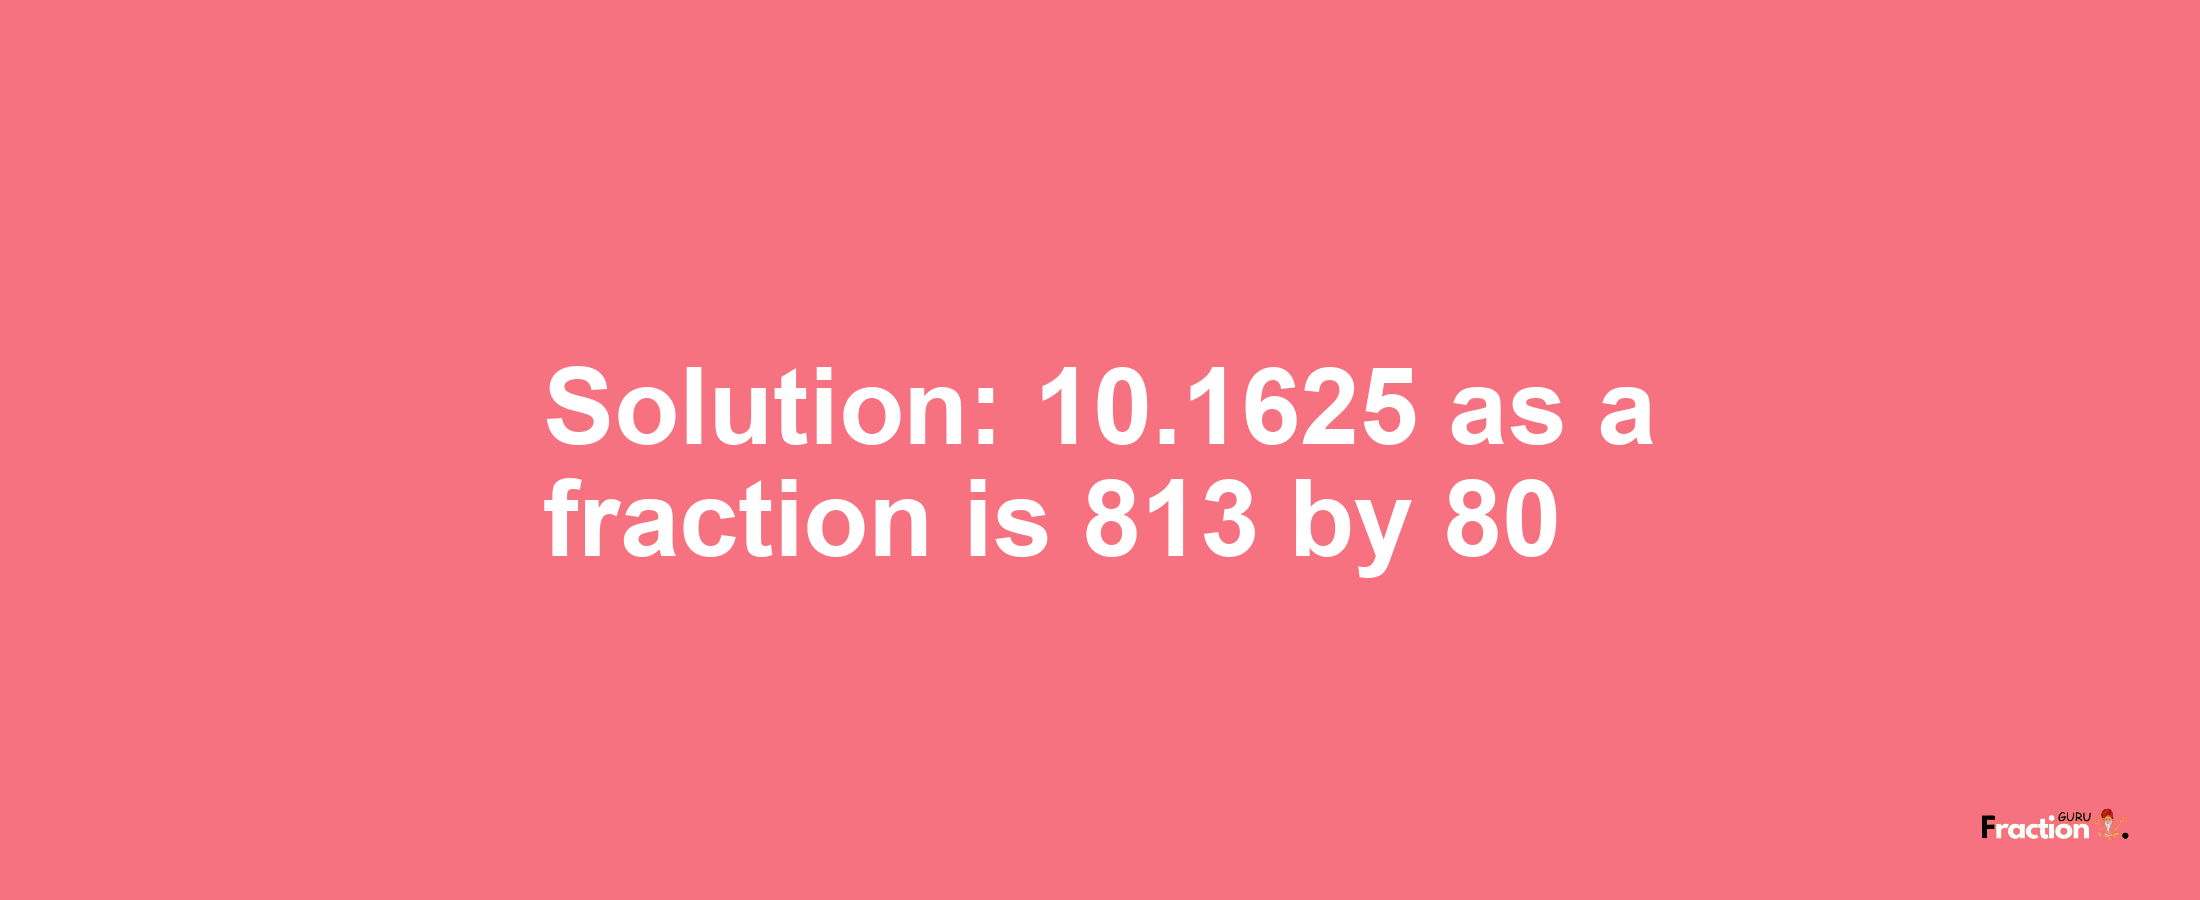 Solution:10.1625 as a fraction is 813/80